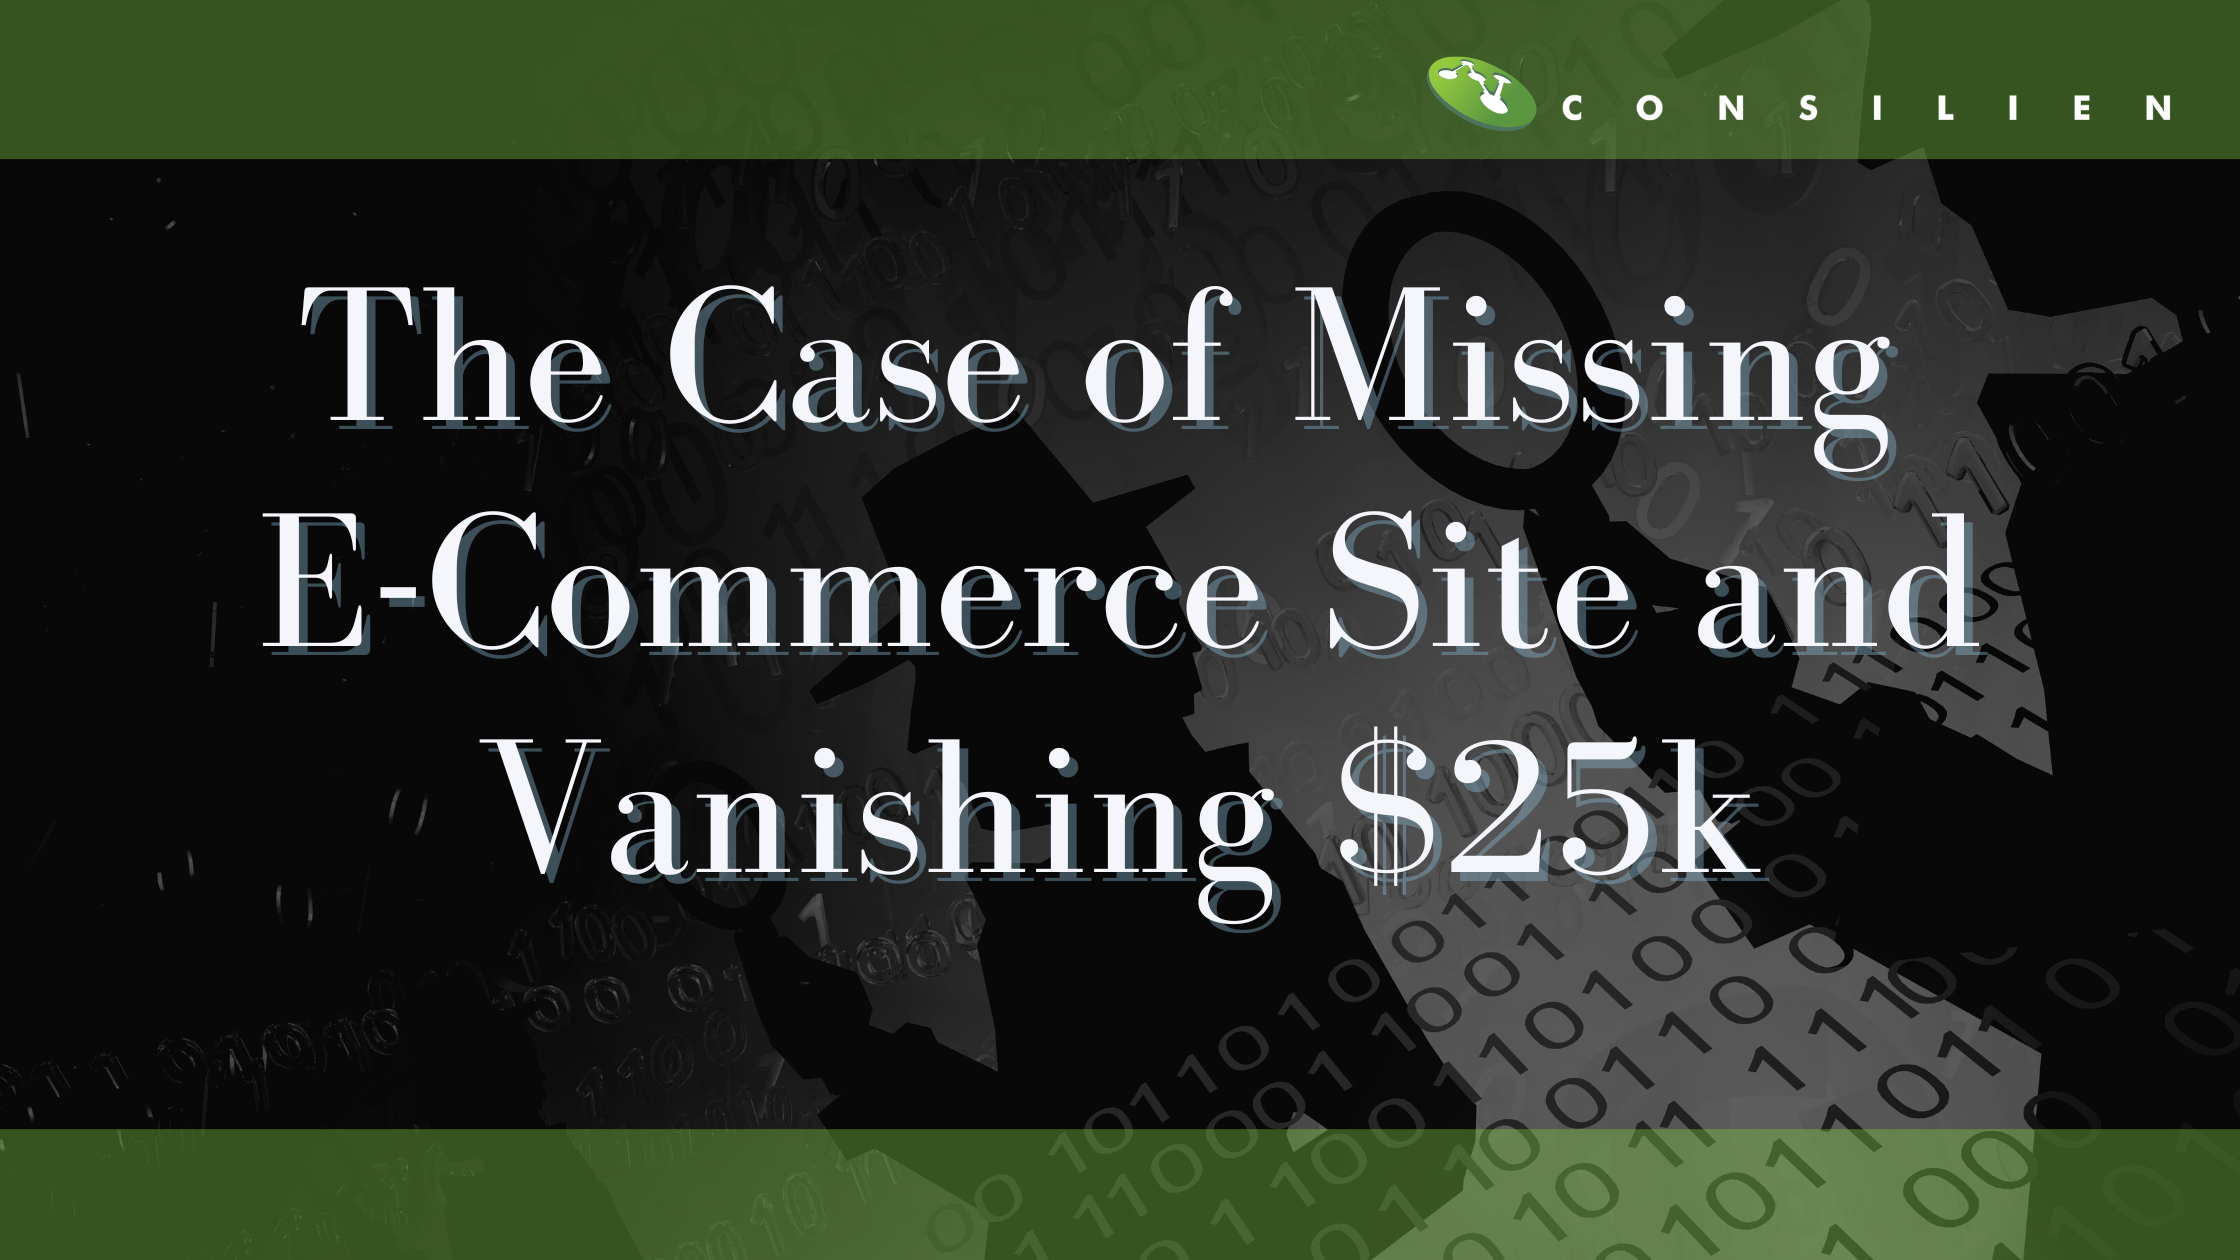 THE CASE OF THE MISSING E-COMMERCE SITE AND VANISHING $25K